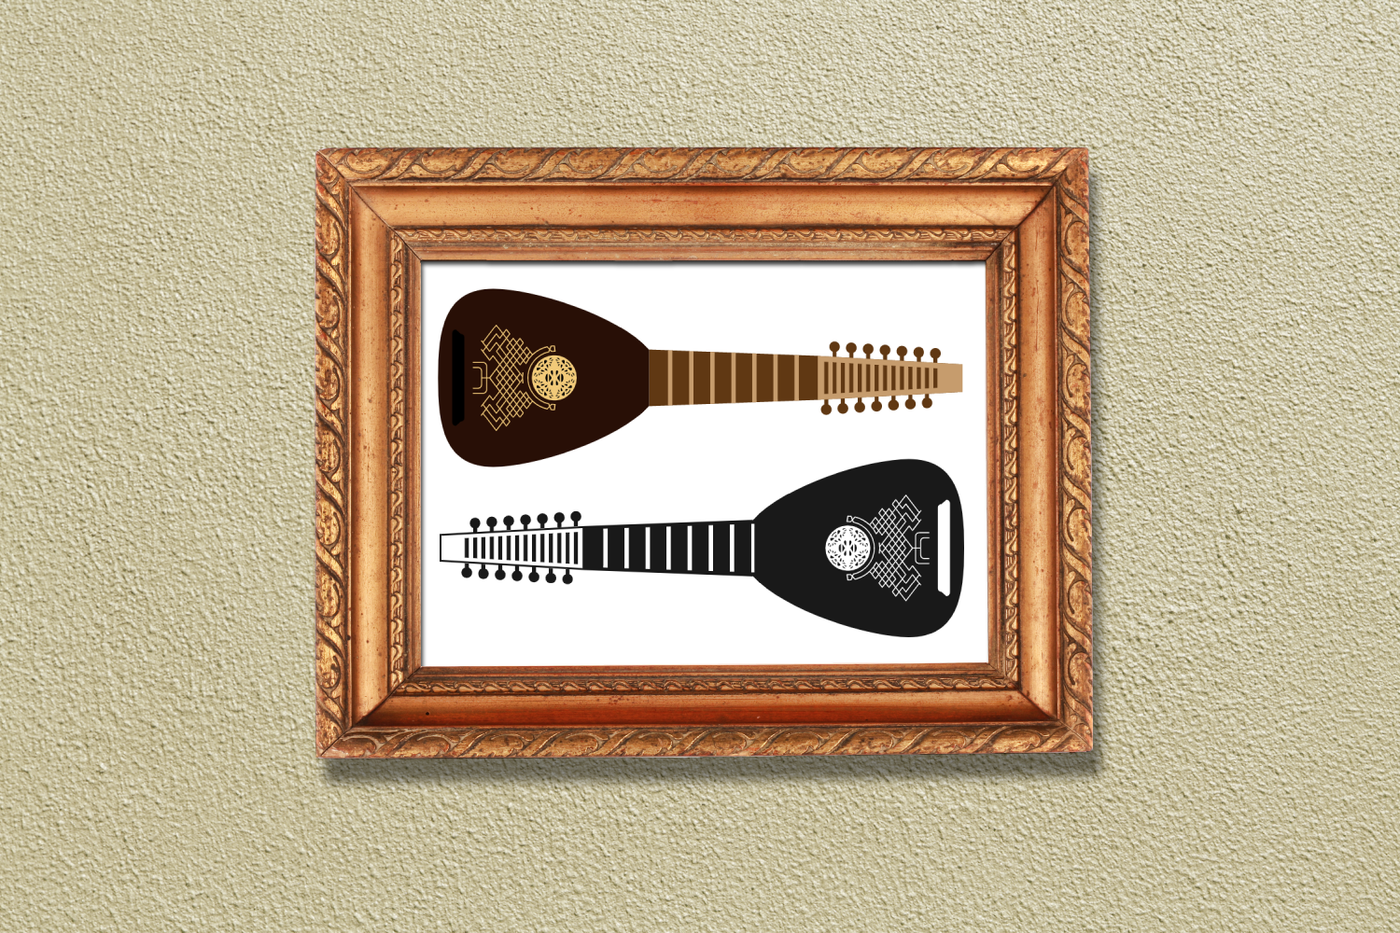 A fancy framed design sits on a beige wall. It has the image of 2 lutes with ornate details.